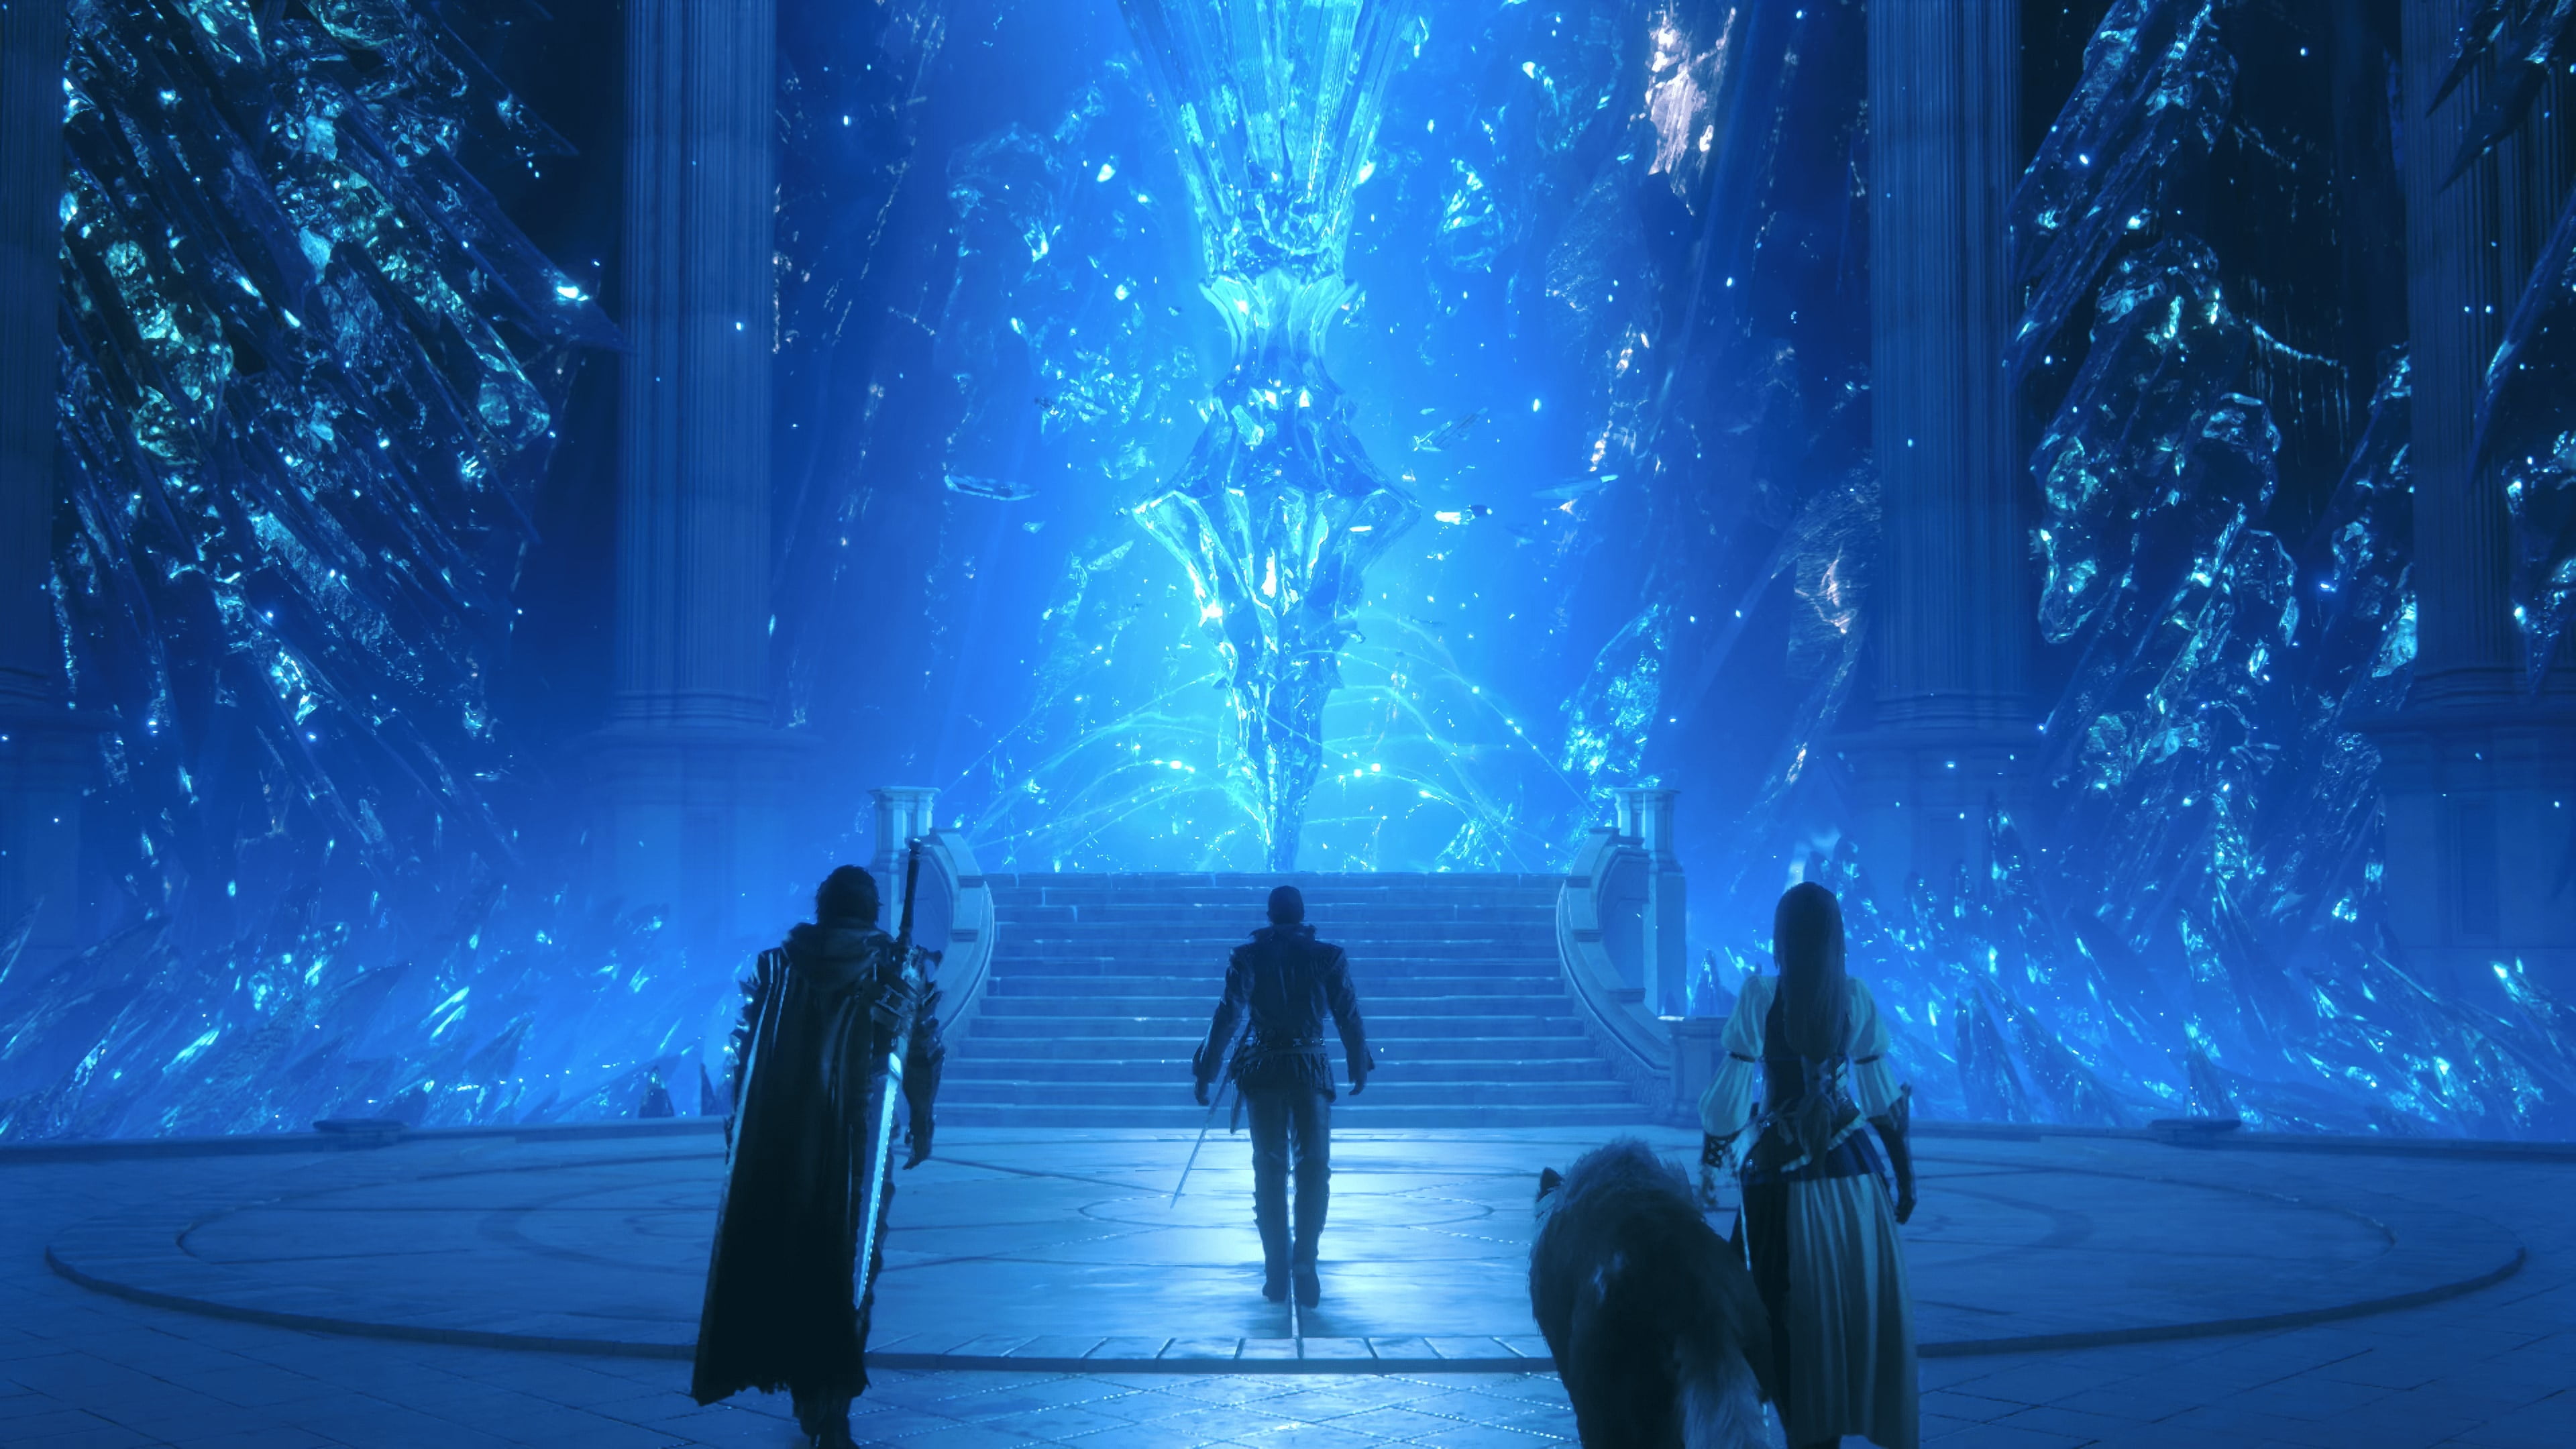 party members: Who are the party members in Final Fantasy 16?